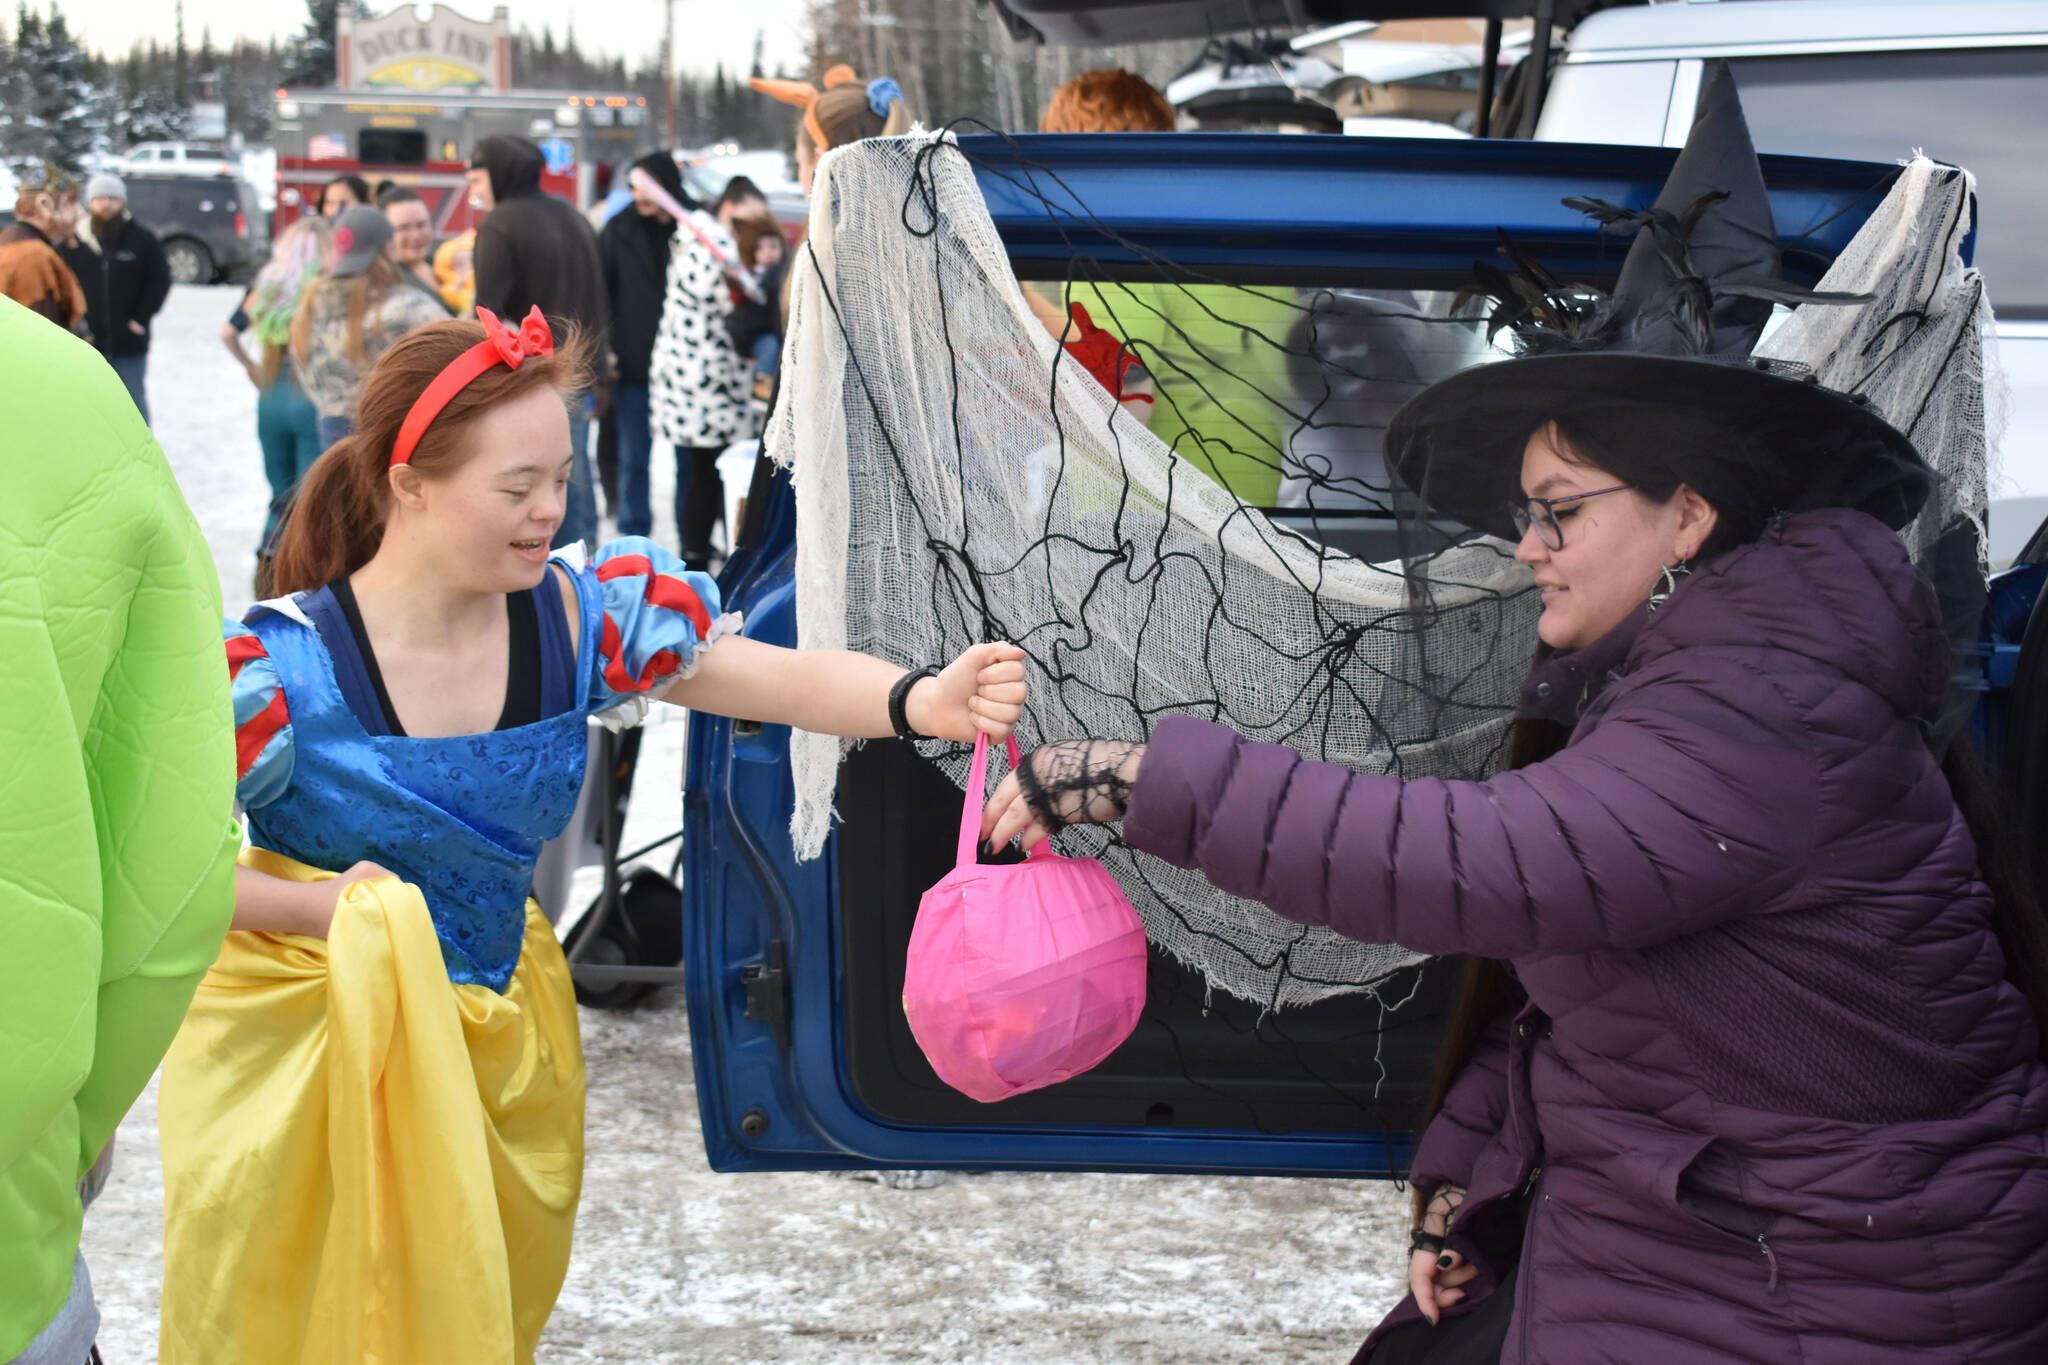 A girl dressed as Snow White takes candy from a witch at the Orca Theater’s Trunk or Treat in Soldotna, Alaska on Monday, Oct. 31, 2022. (Jake Dye/Peninsula Clarion)